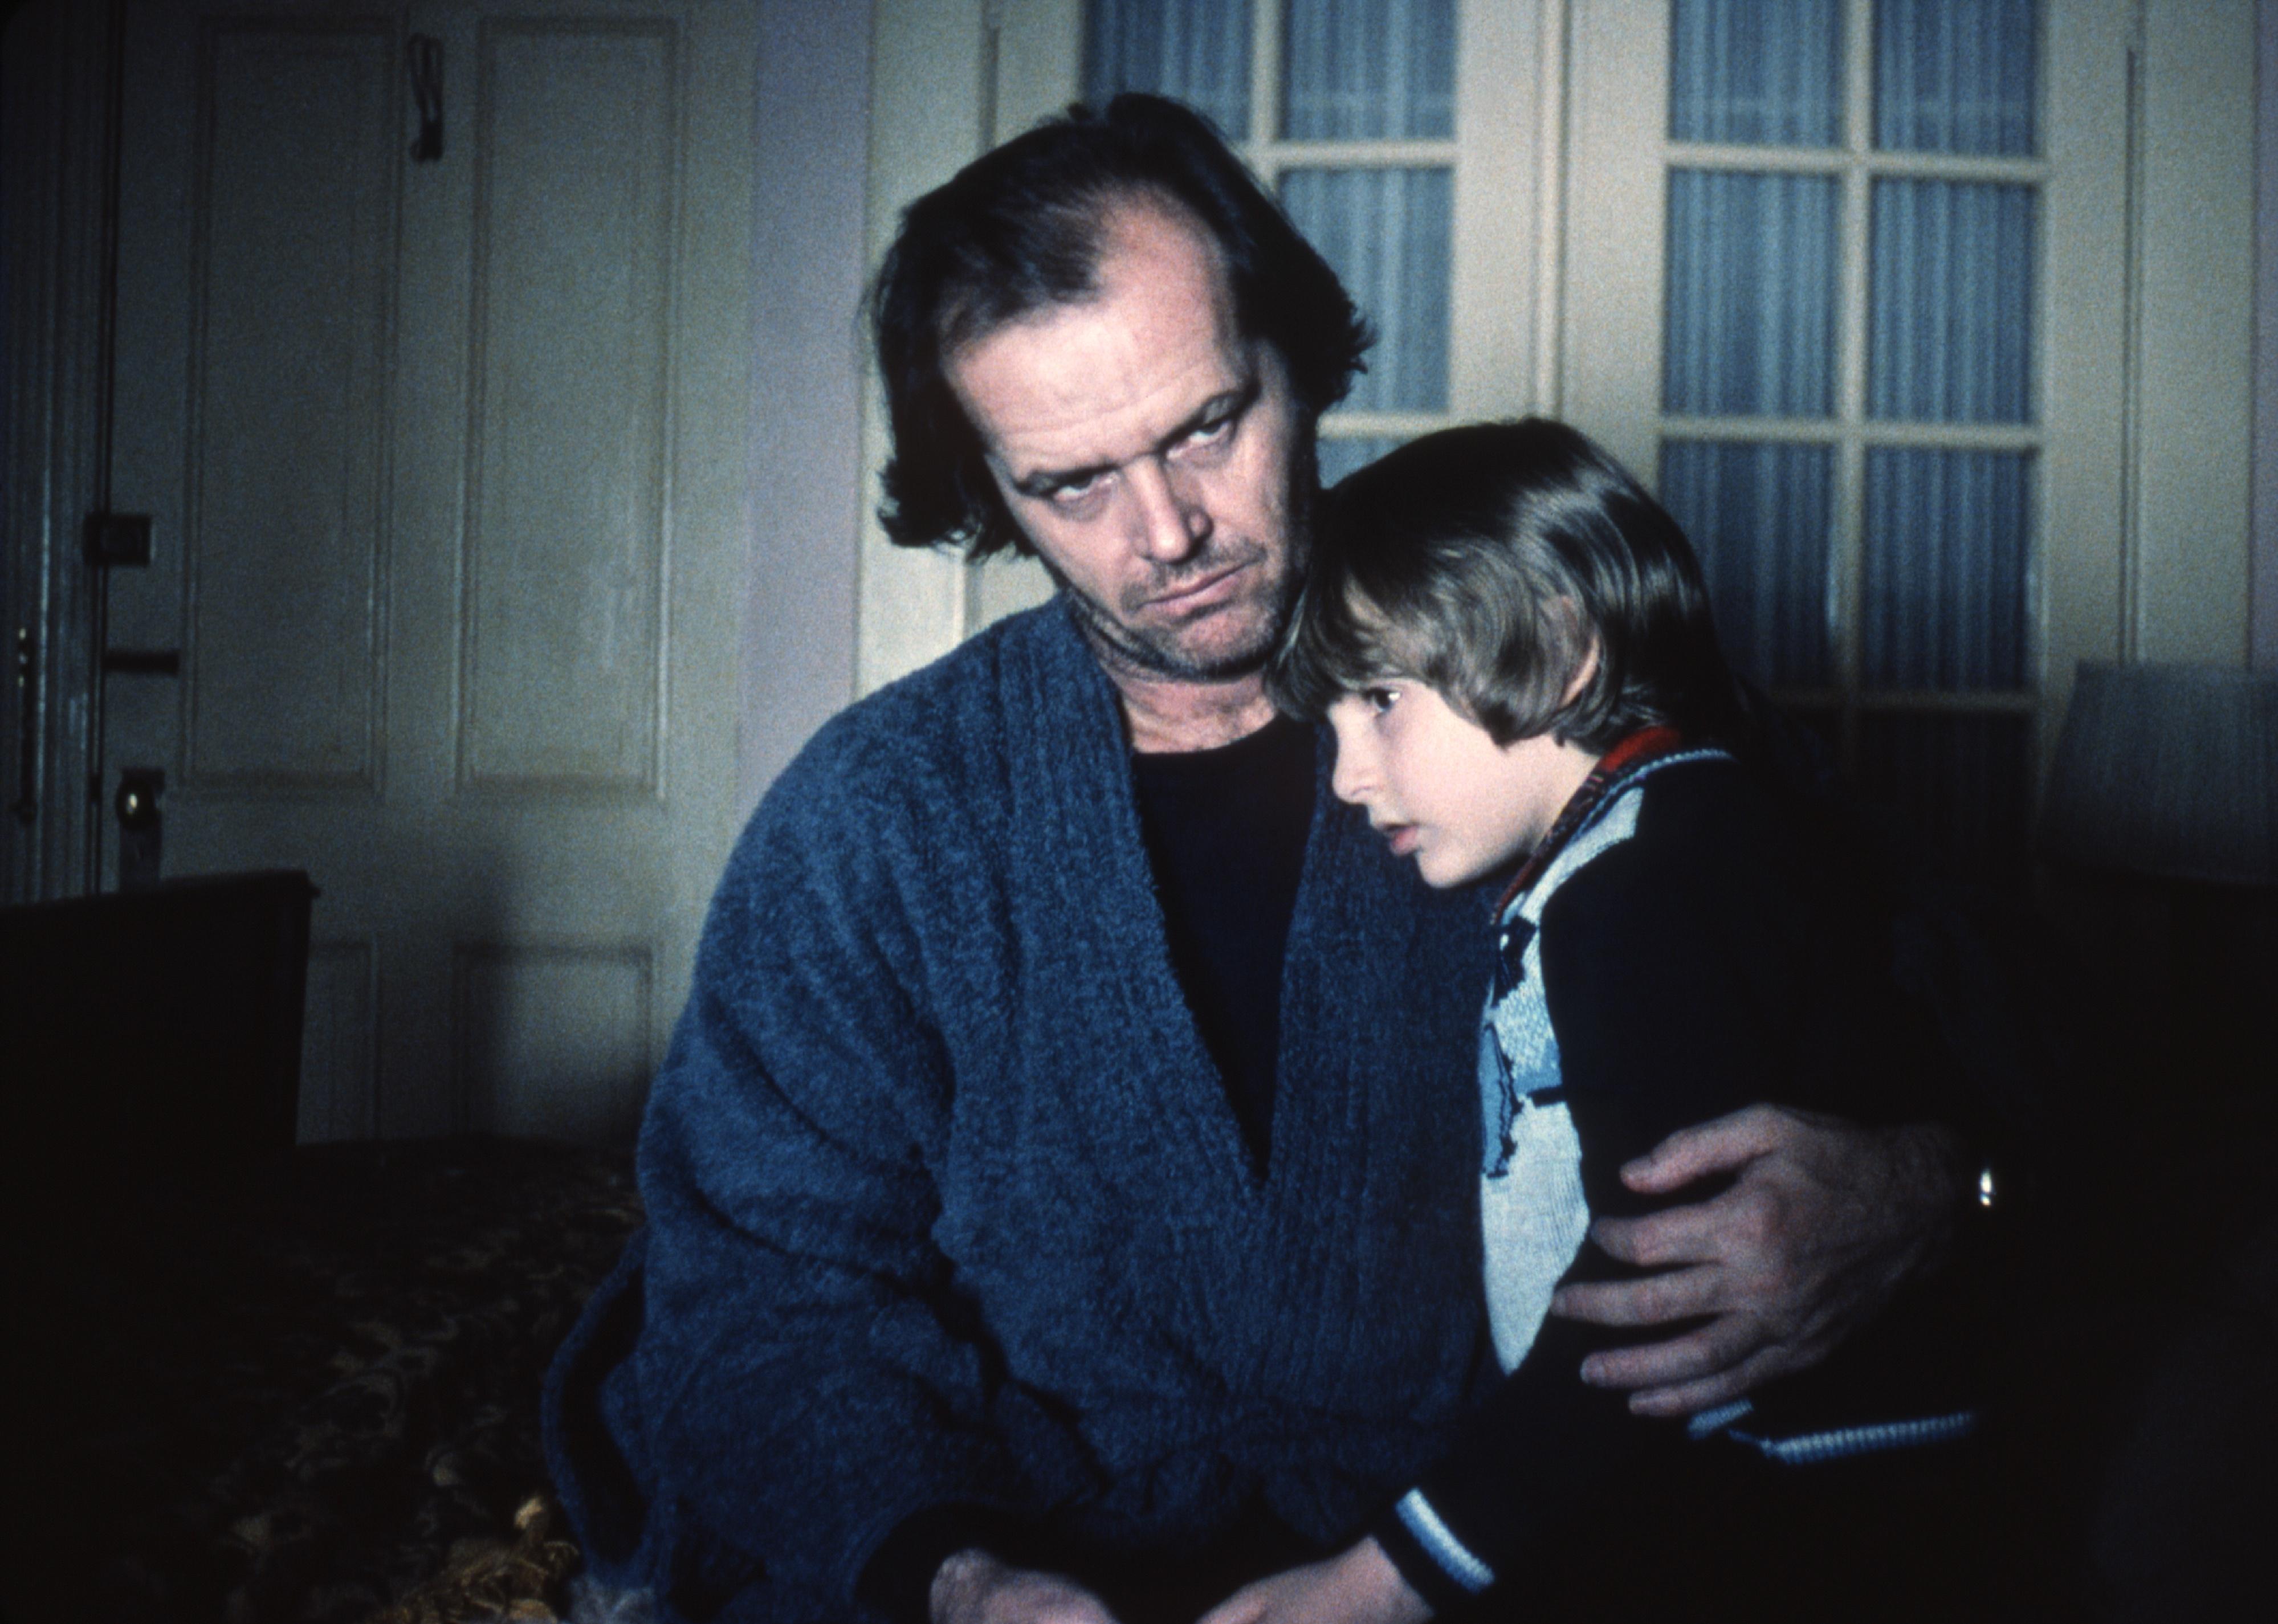 Jack Nicholson and Danny Lloyd on the set of The Shining